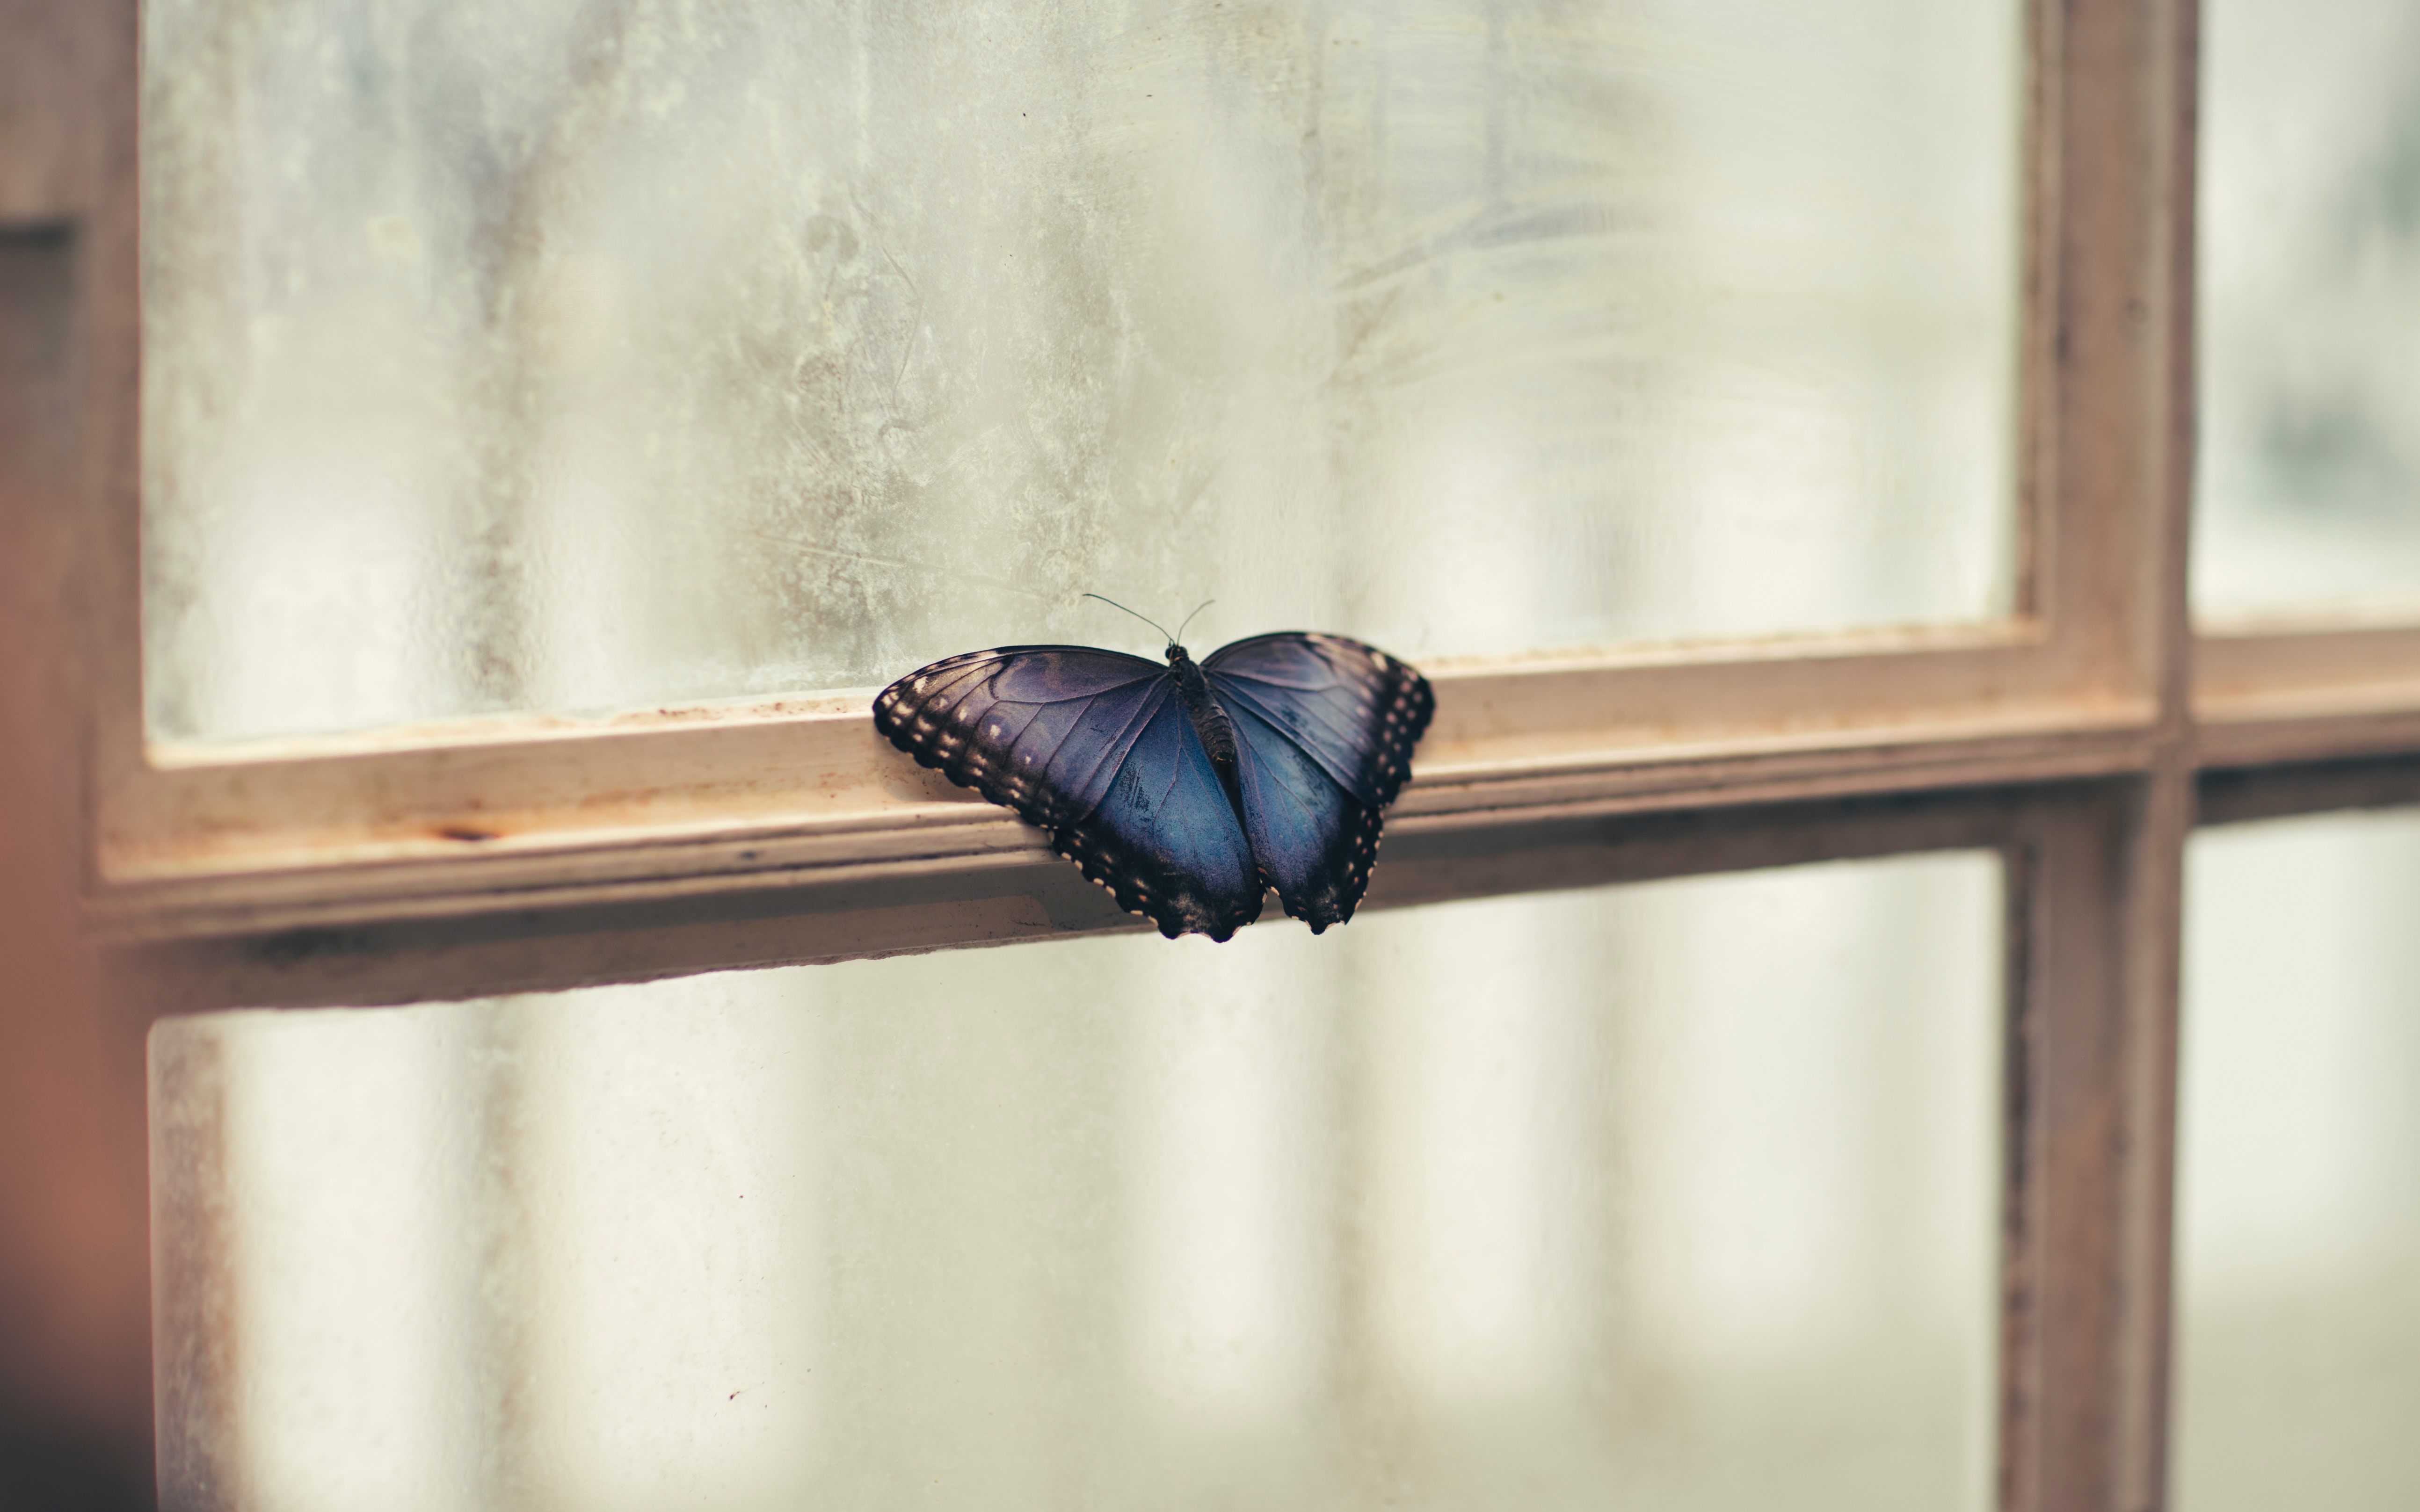 Lessons of a Struggling Butterfly